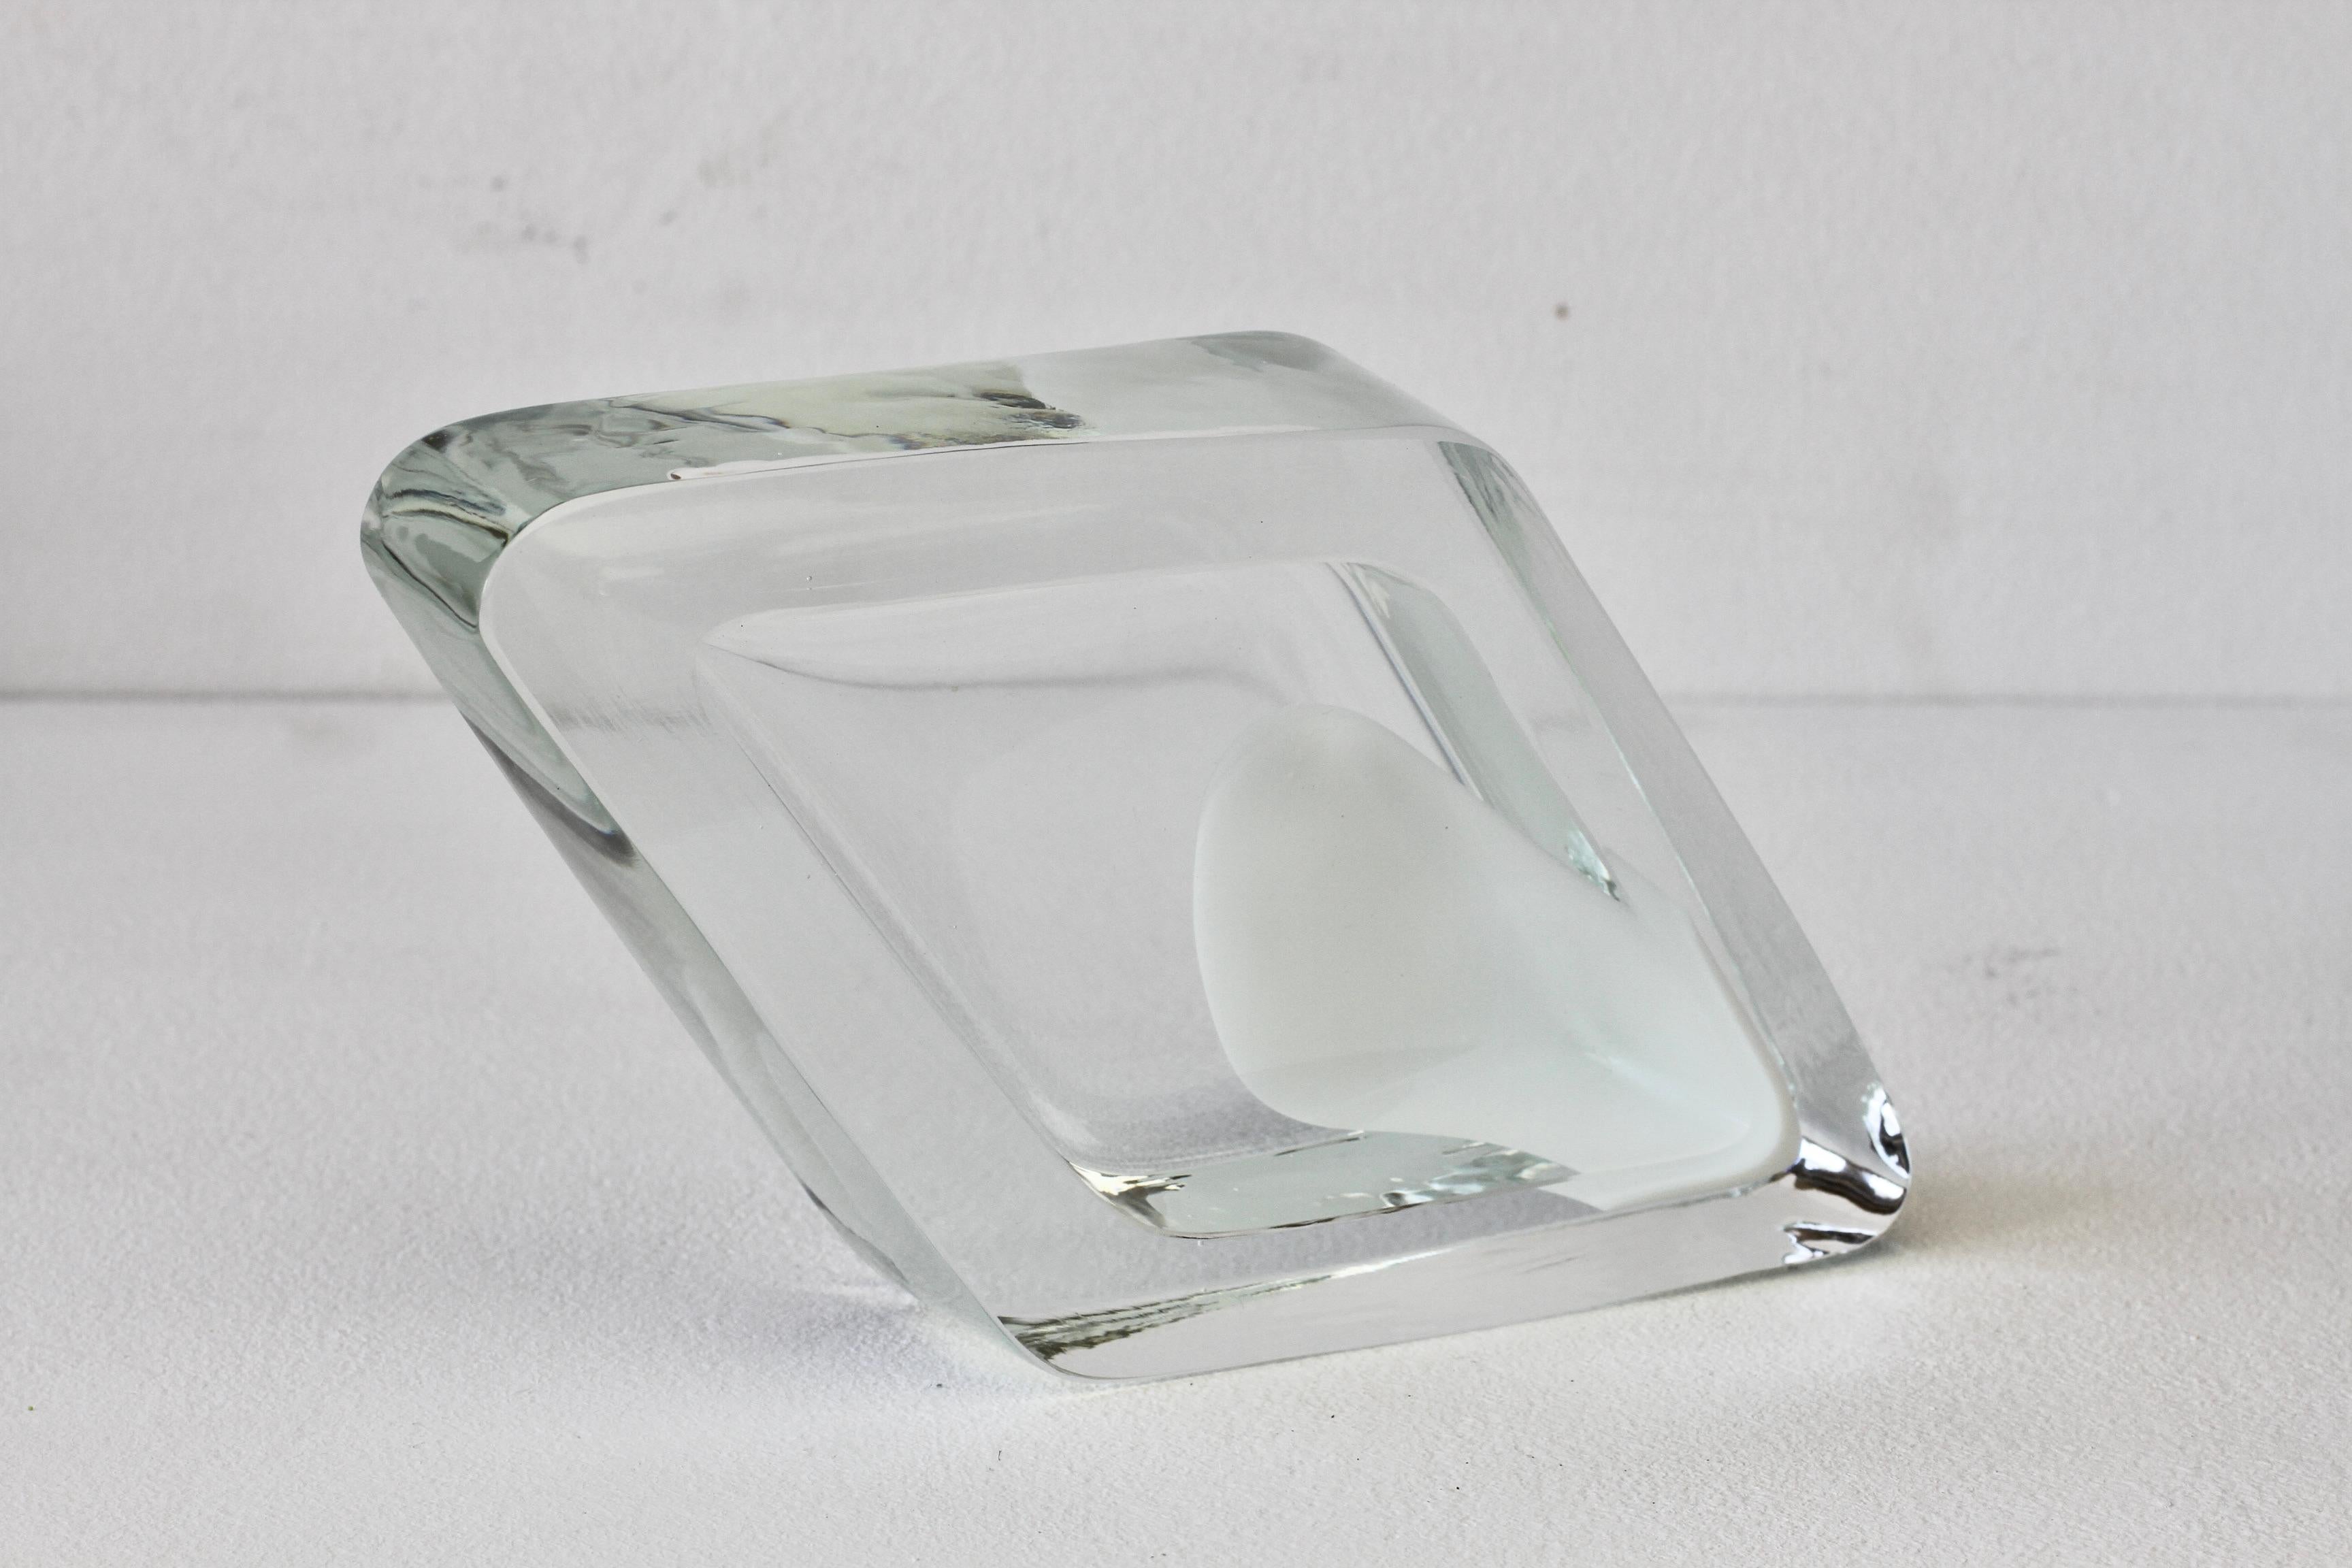 Large Cenedese Italian Rhombus White and Clear Murano Glass Bowl, Dish, Ashtray For Sale 6